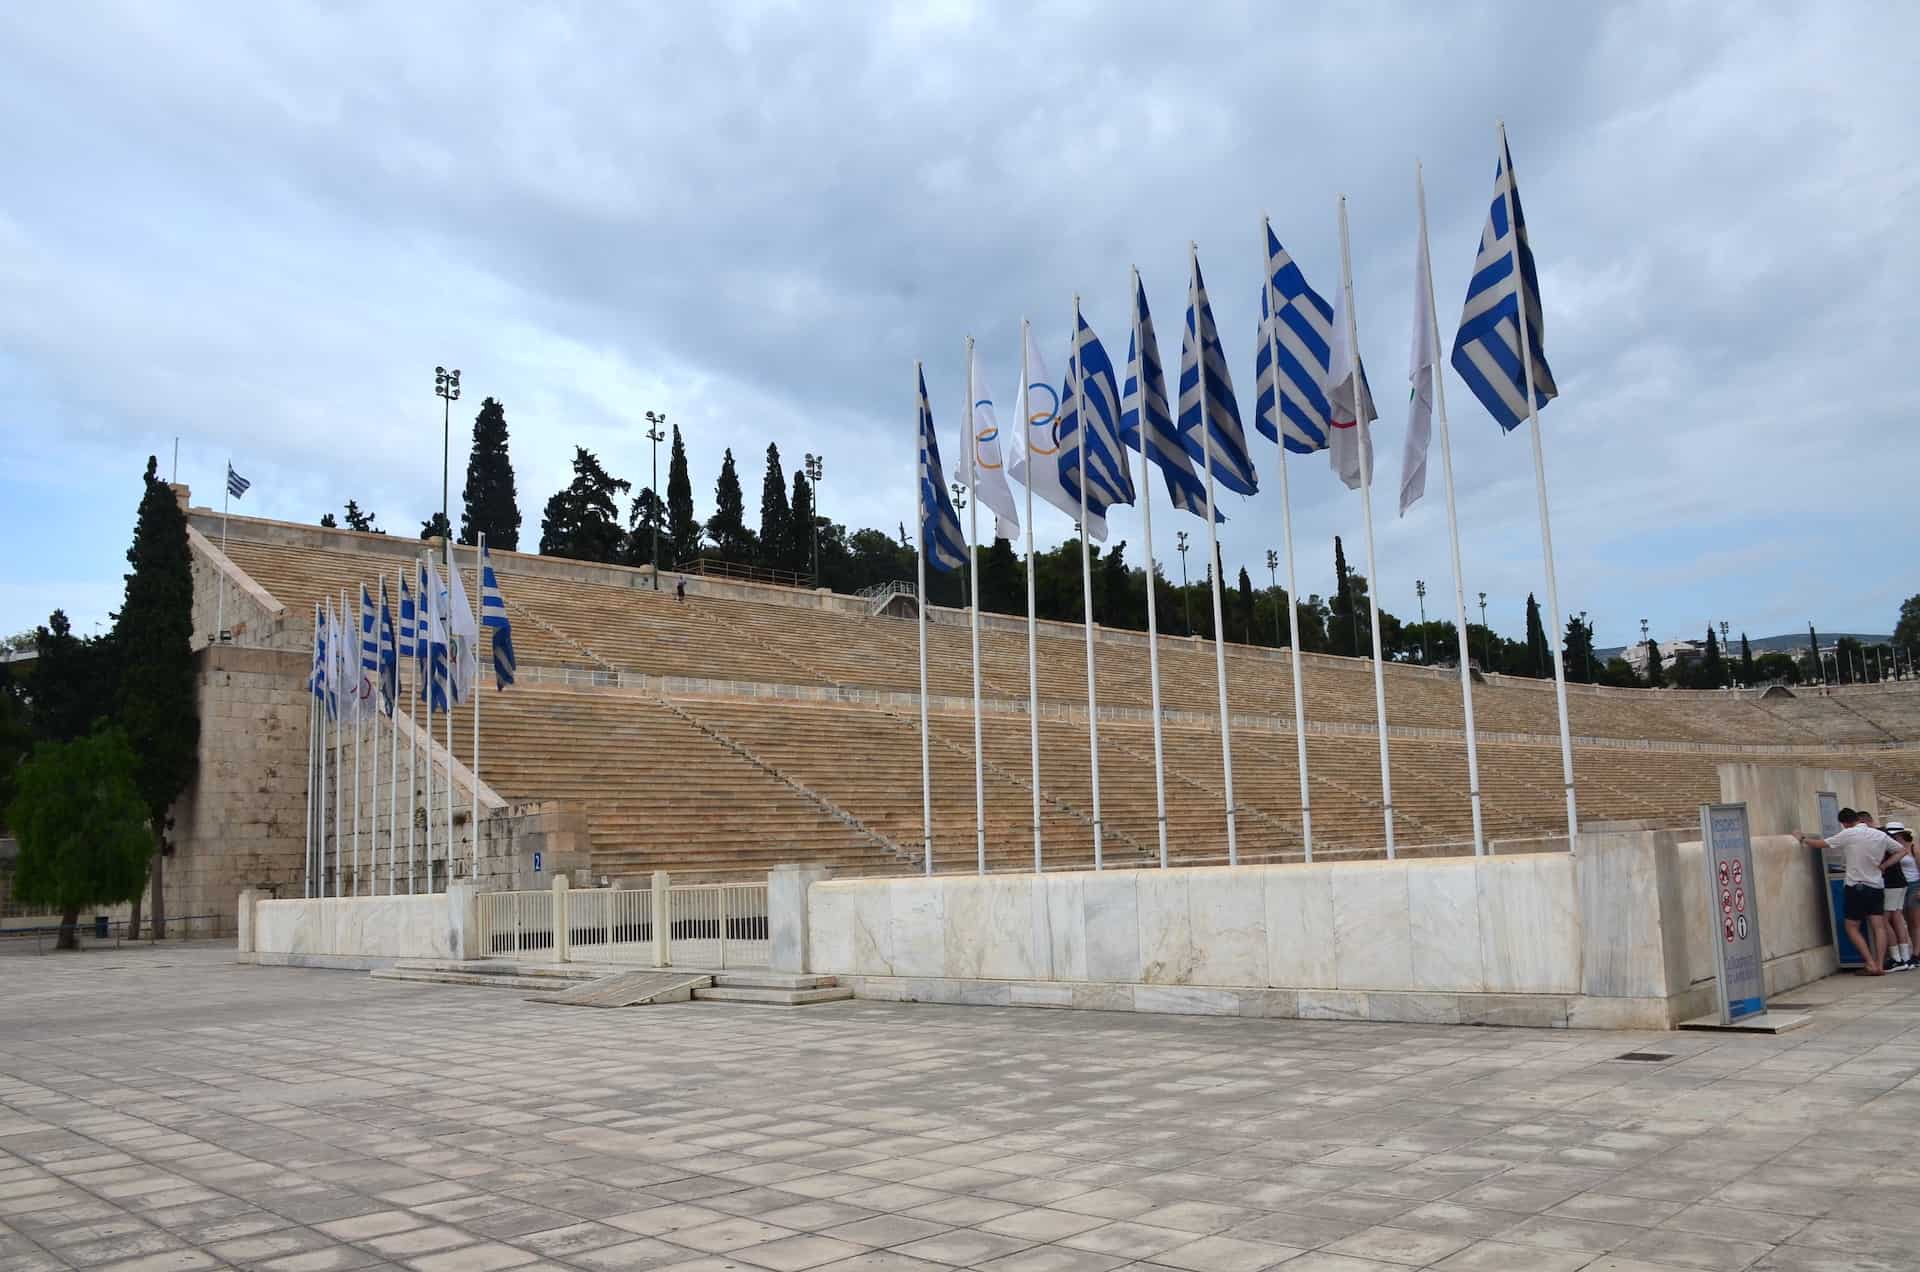 Greek and Olympic flags at Panathenaic Stadium in Athens, Greece